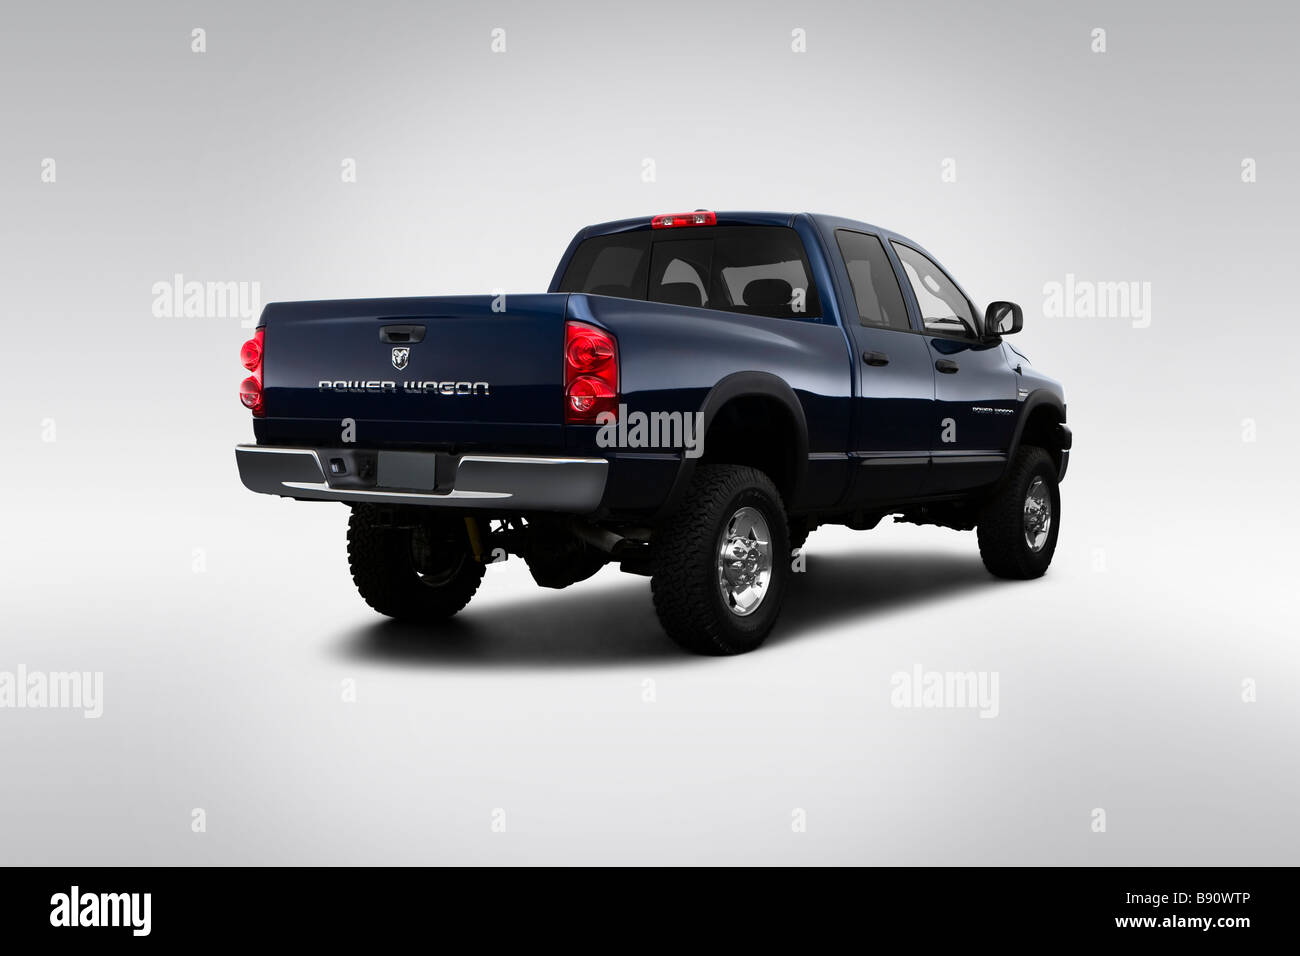 2009 Dodge Ram 2500 SLT in Blue - Rear angle view Stock Photo - Alamy